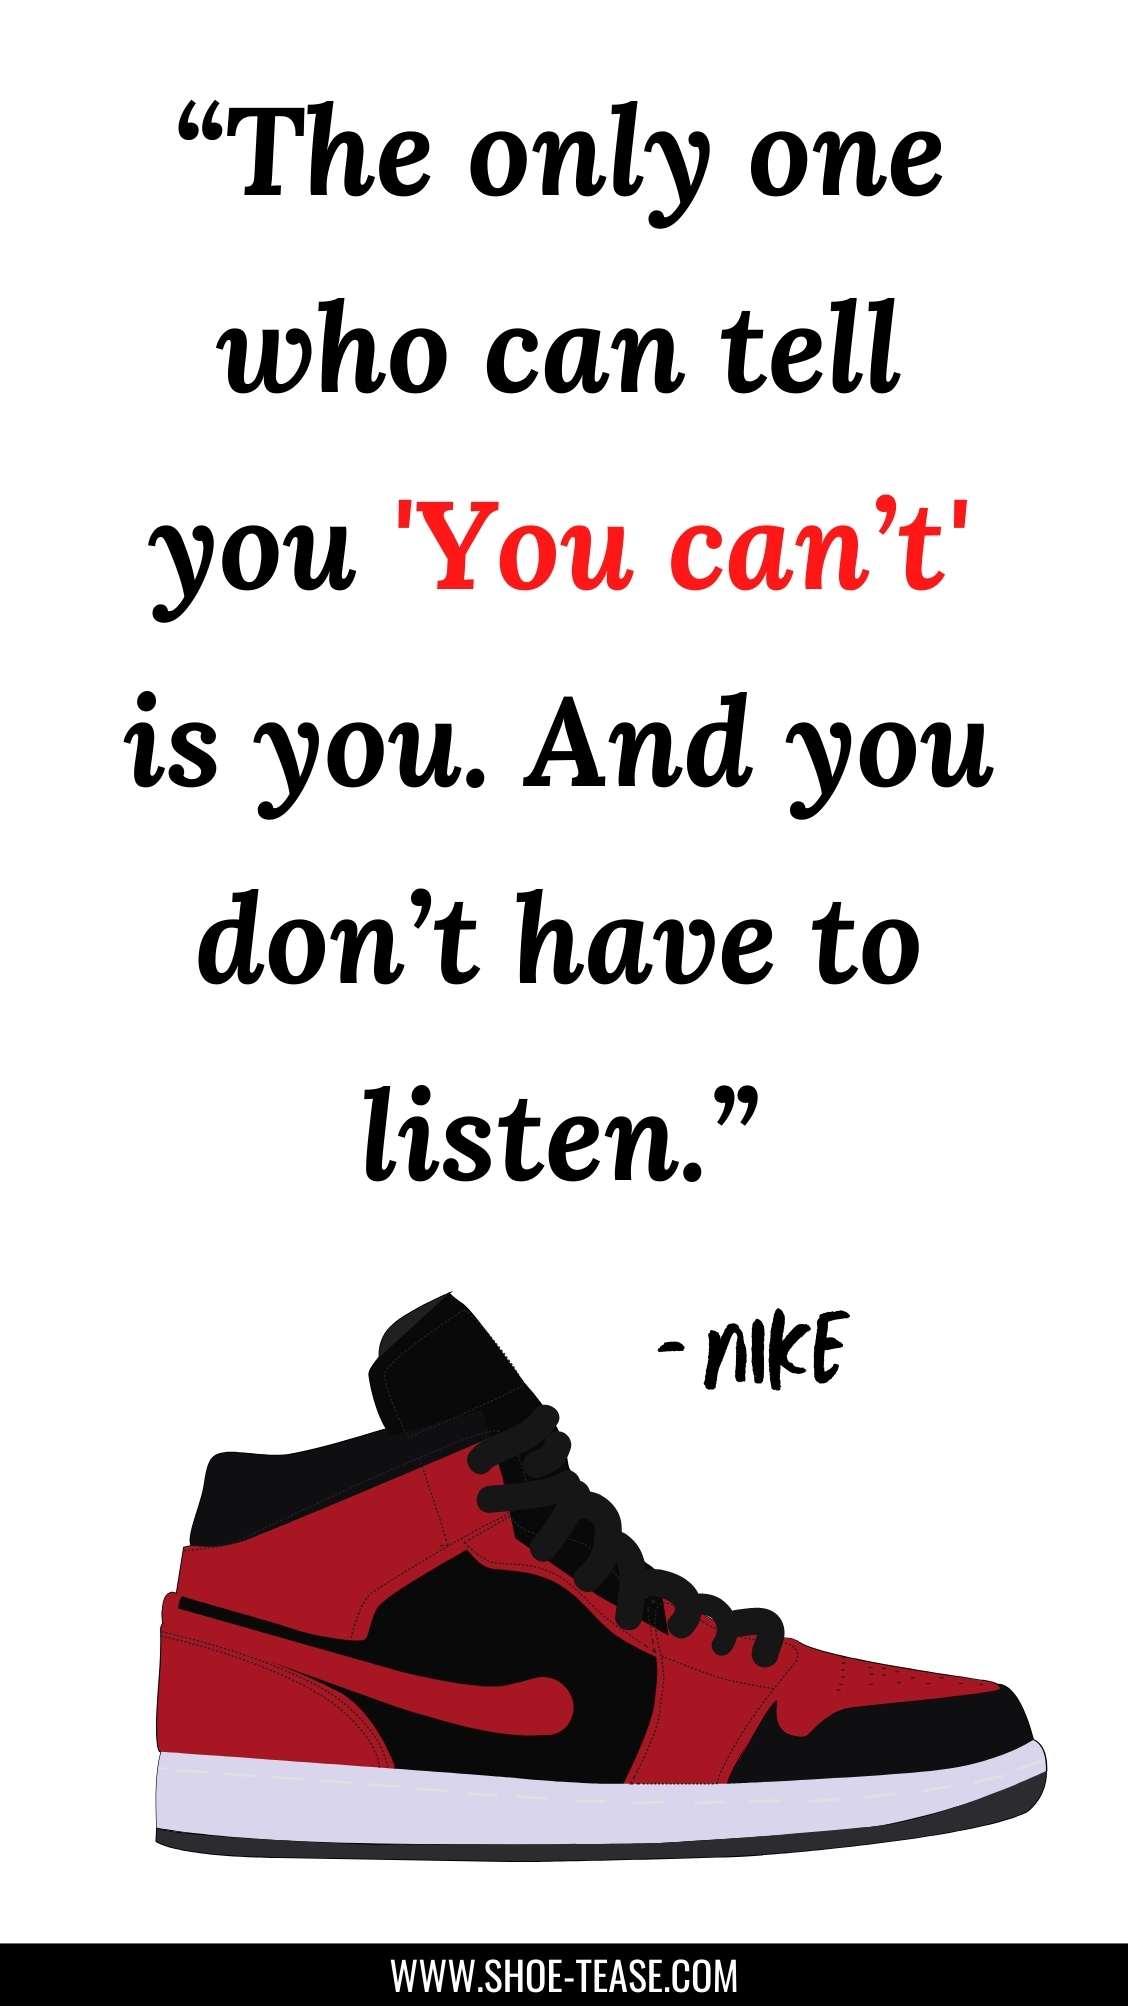 Nike Quote reading The only one who can tell you 'You can't' is you. And you don't have to listen over 1 red and black sneaker.